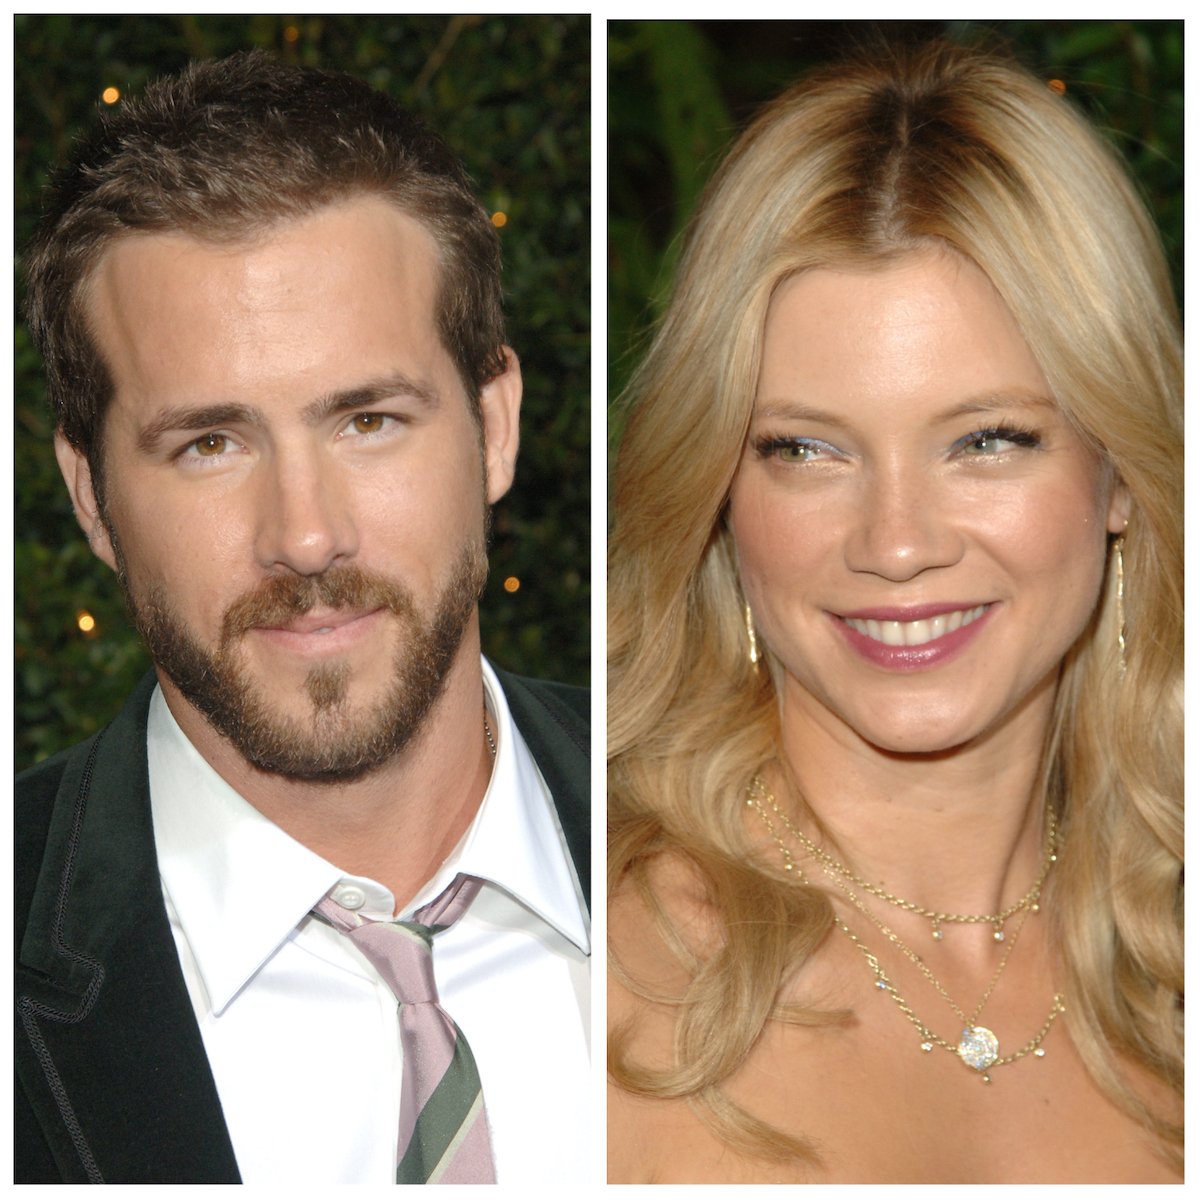 Ryan Reynolds and Amy Smart during the 'Just Friends' premiere